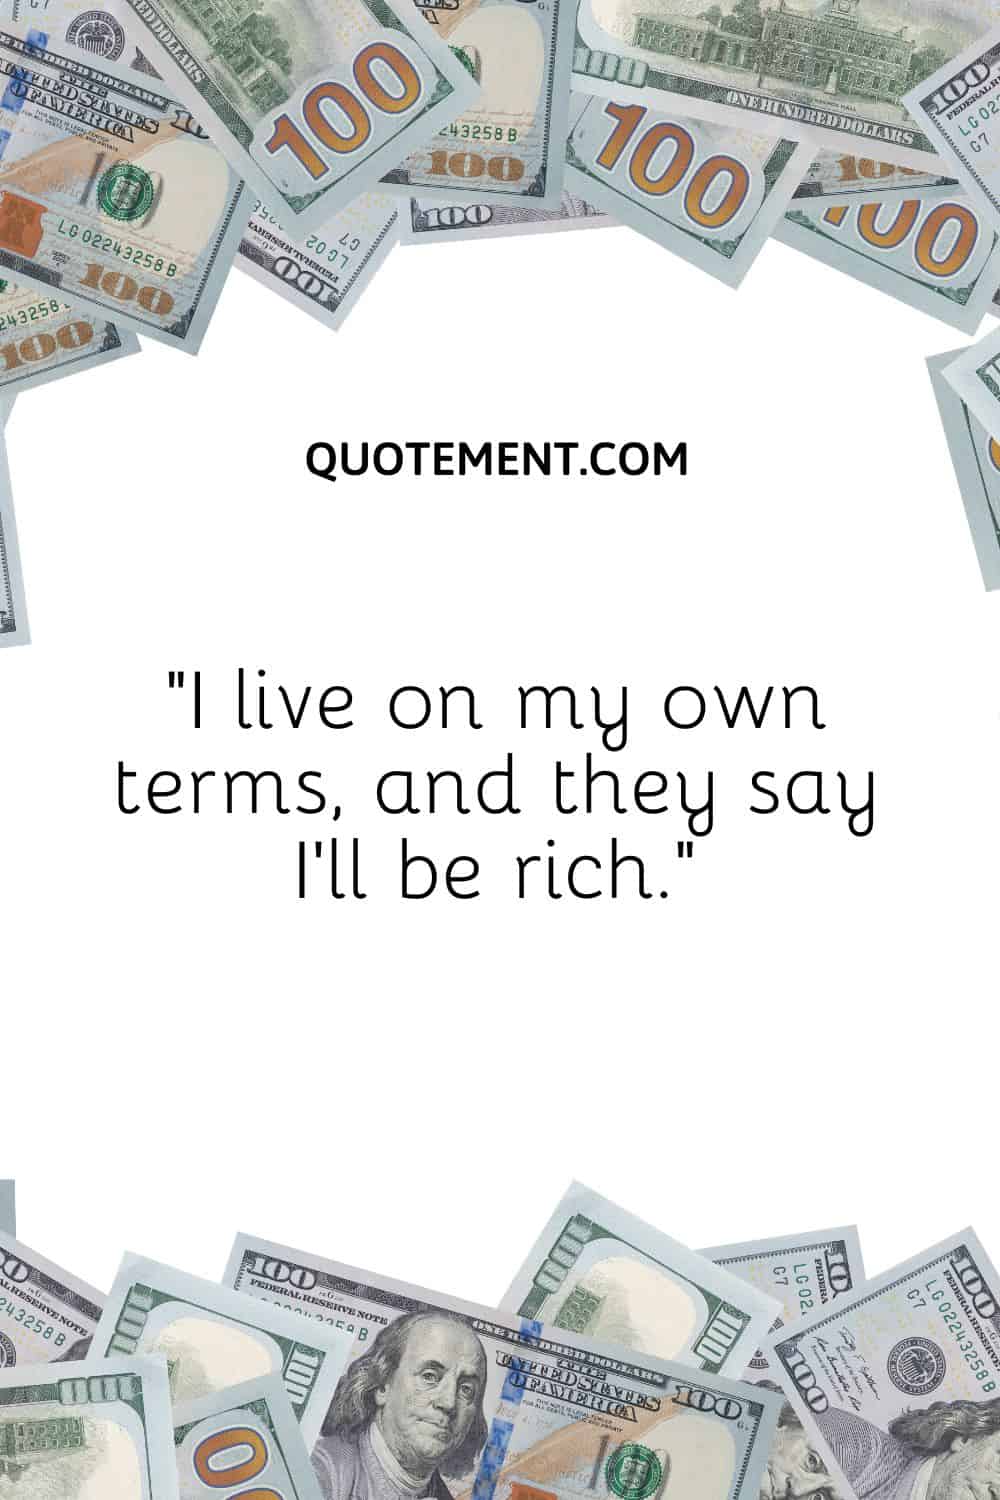 I live on my own terms, and they say I’ll be rich.”